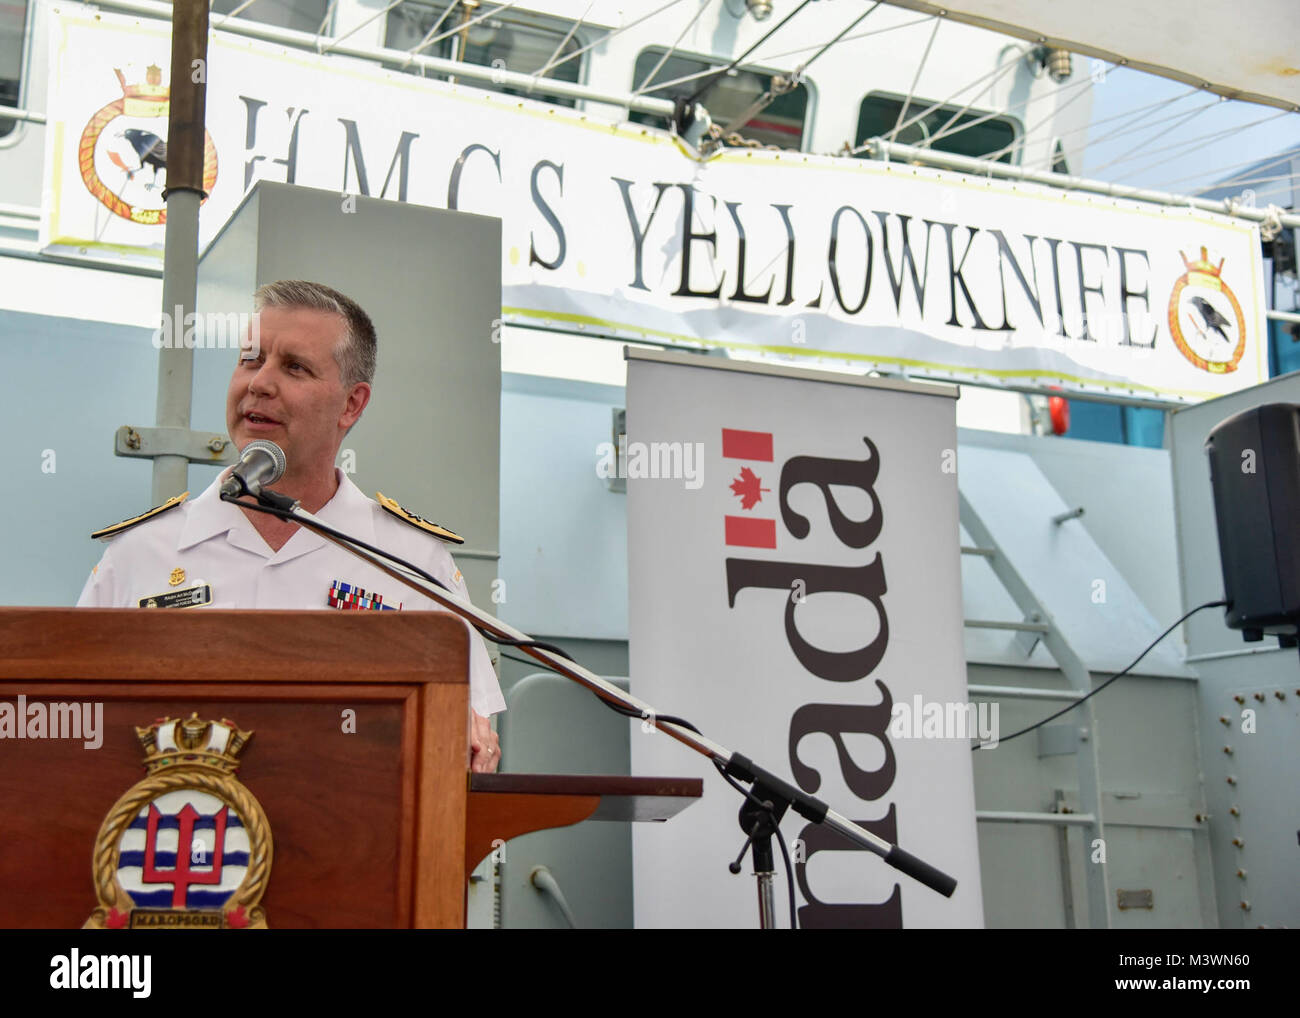 170805-N-MT581-021 SEATTLE (Aug. 05, 2017)  Royal Canadian Navy Rear Adm. Art McDonald, commander, Maritime Forces Pacific and Joint Task Force Pacific, speaks during a Canadian reception co-hosted aboard Royal Canadian Navy ships HMCS Yellowknife (MM 706) and HMCS Edmonton (MM 703) by the Royal Canadian Navy during Seattle Seafair Fleet Week. Seafair Fleet Week is an annual celebration of the sea services wherein Sailors, Marines and Coast Guard members from visiting U.S. Navy and Coast Guard ships and ships from Canada make the city a port of call. (U.S. Navy photo by Mass Communication Spec Stock Photo